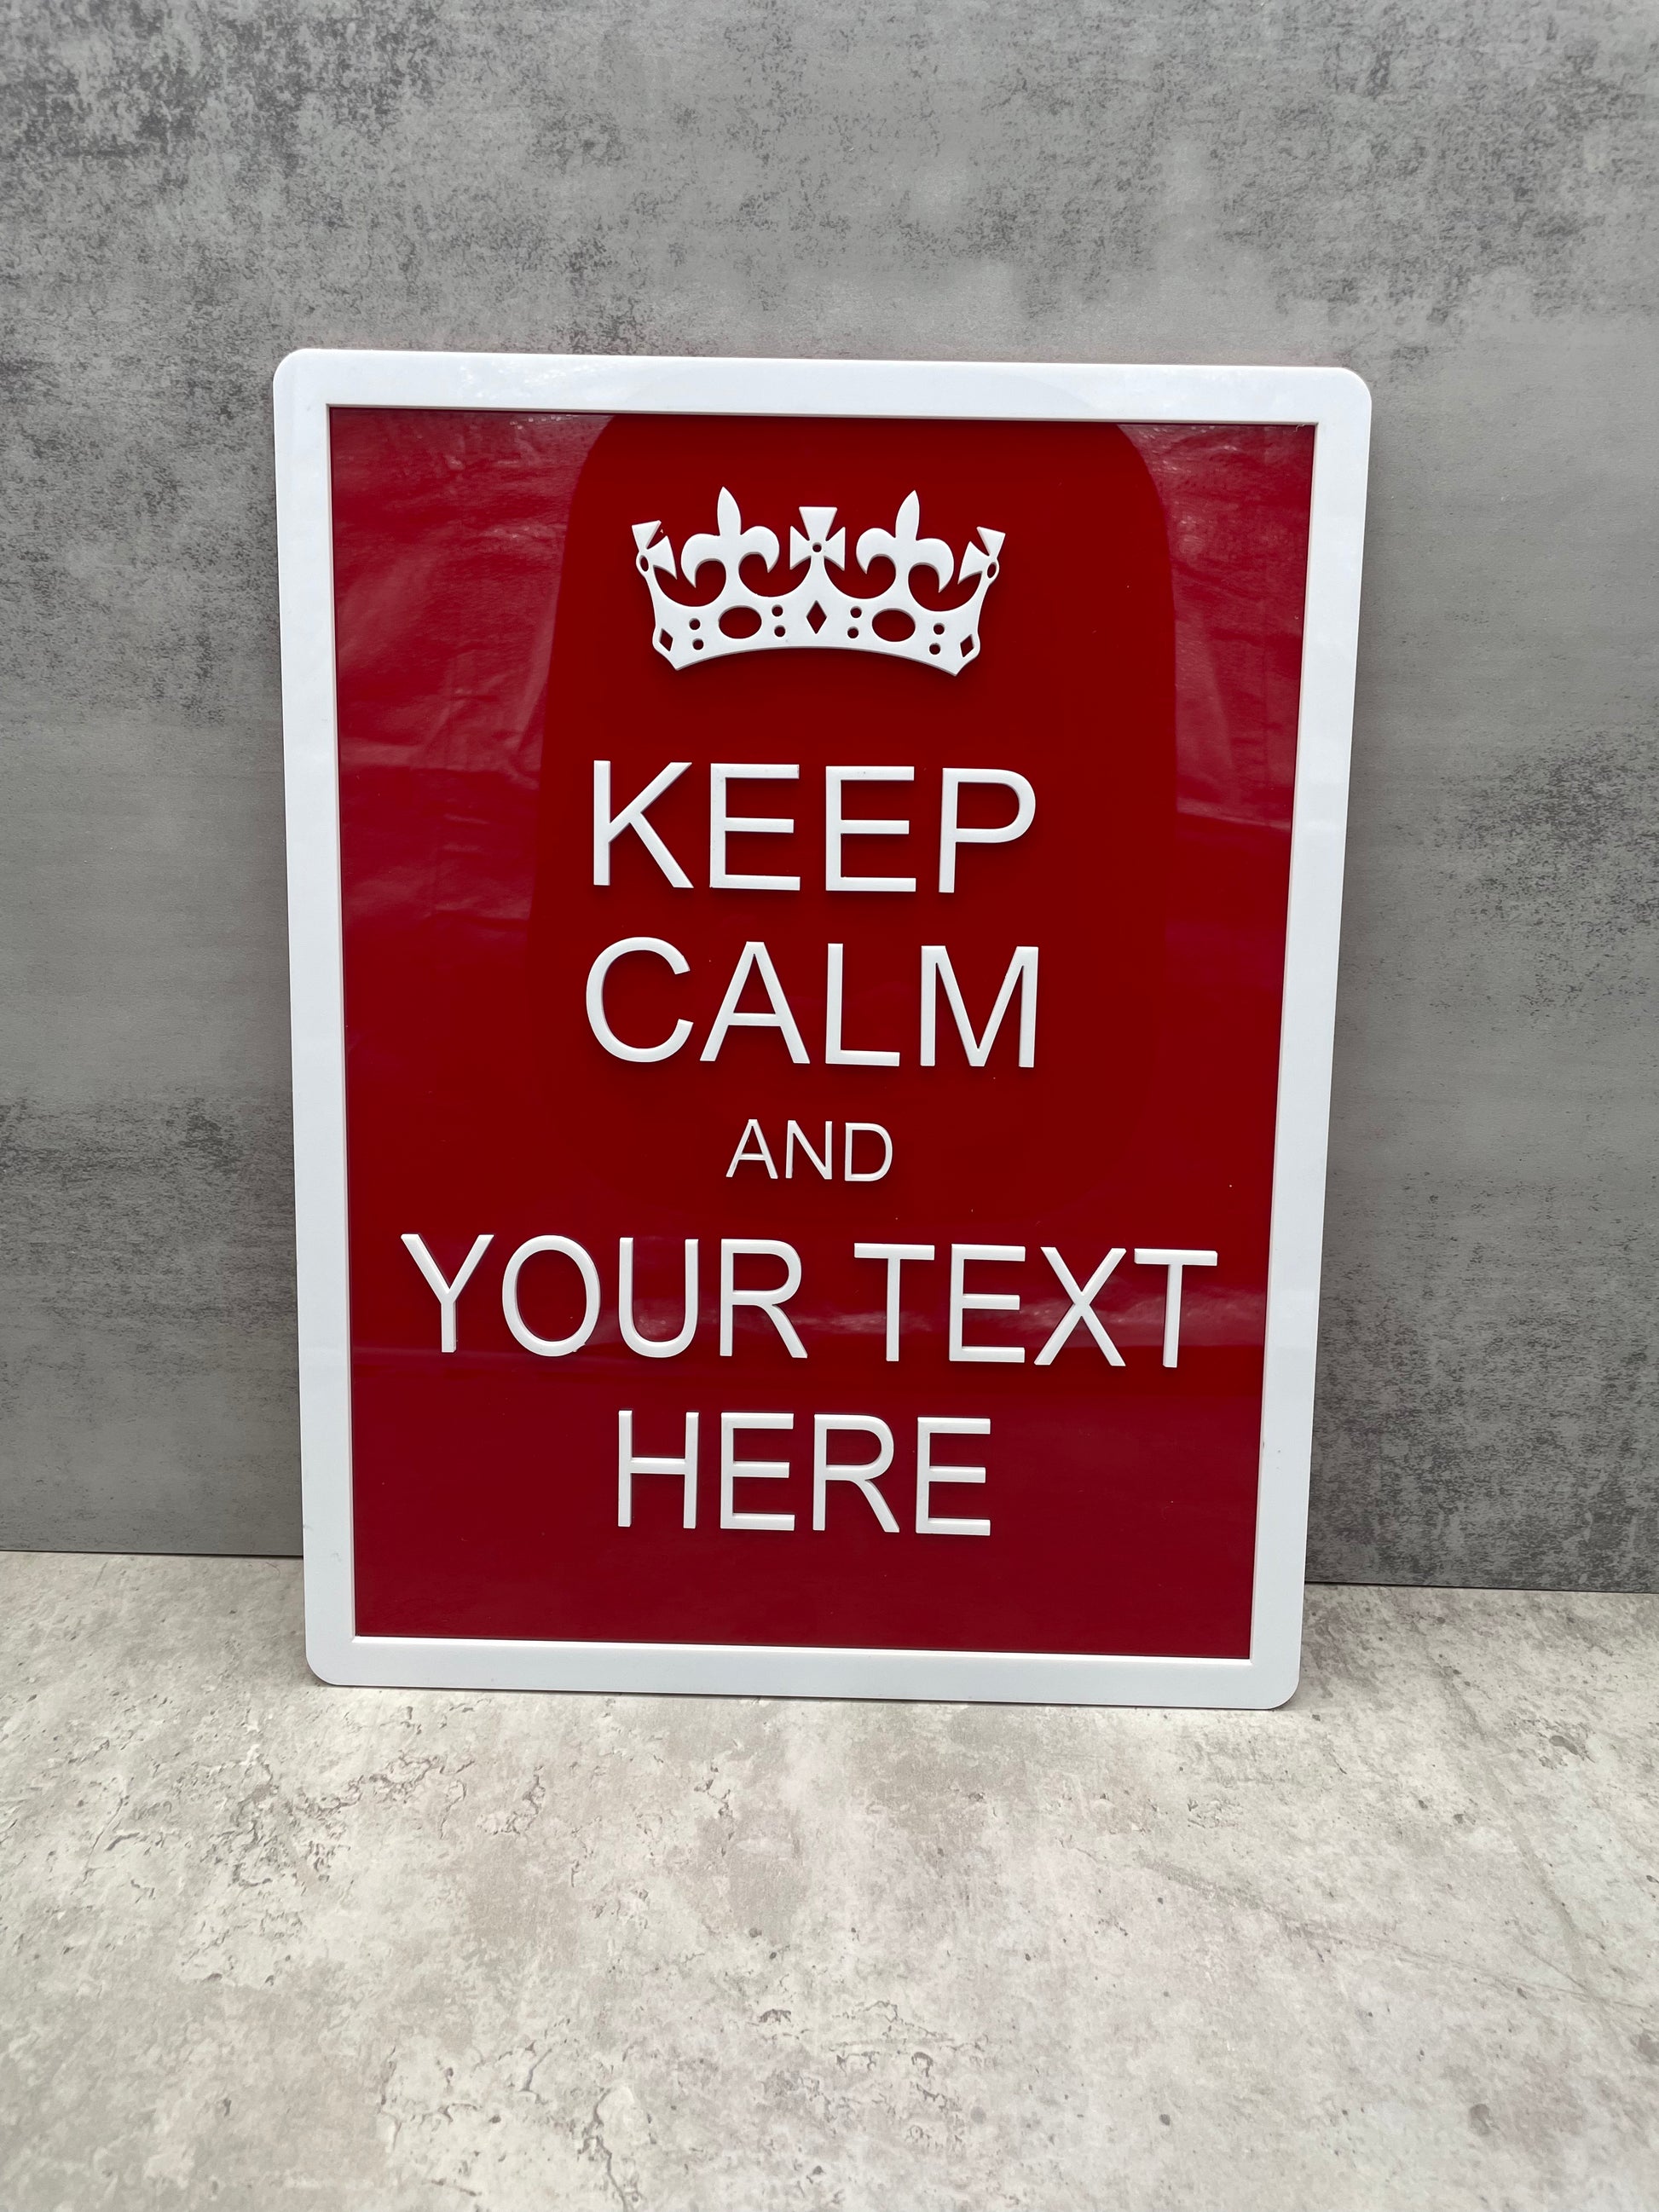 keep calm and carry on custom sign in red and white